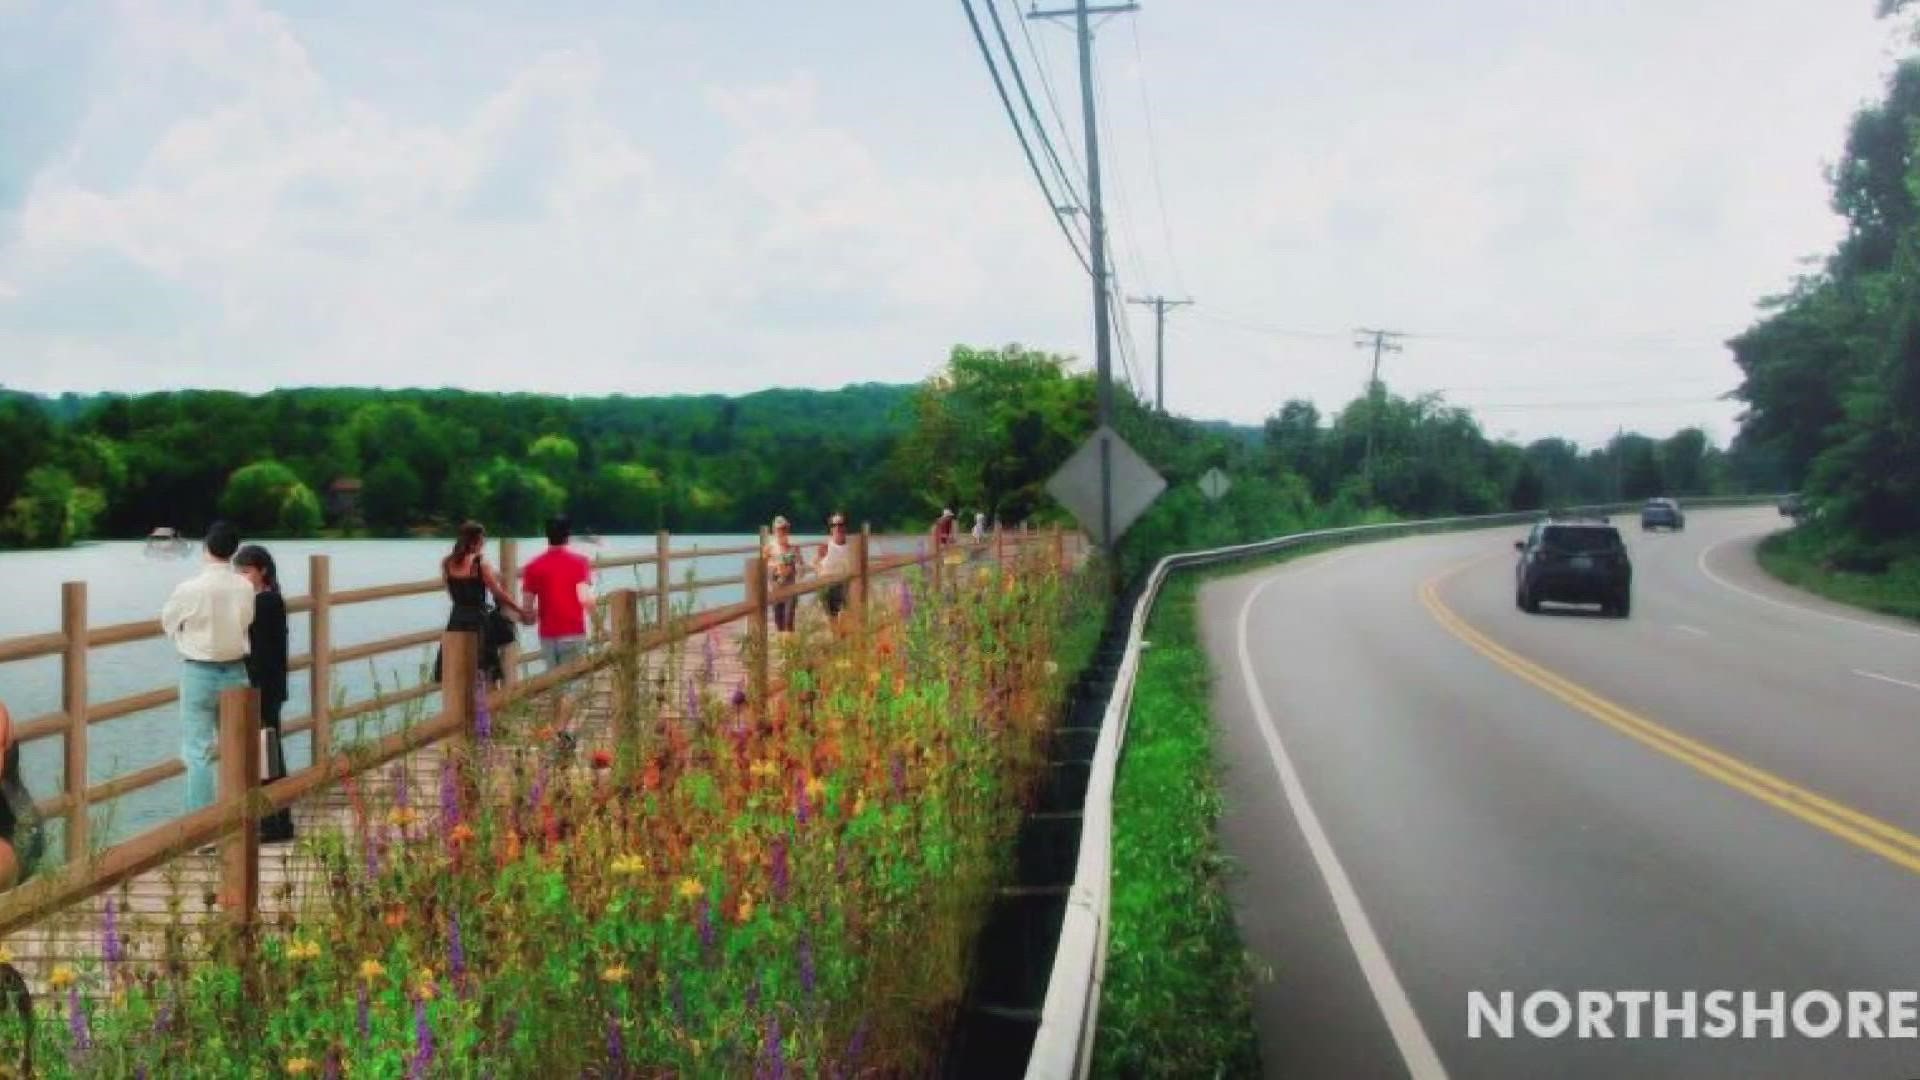 Crews are building more greenways and trails in the Farragut area as part of the project.